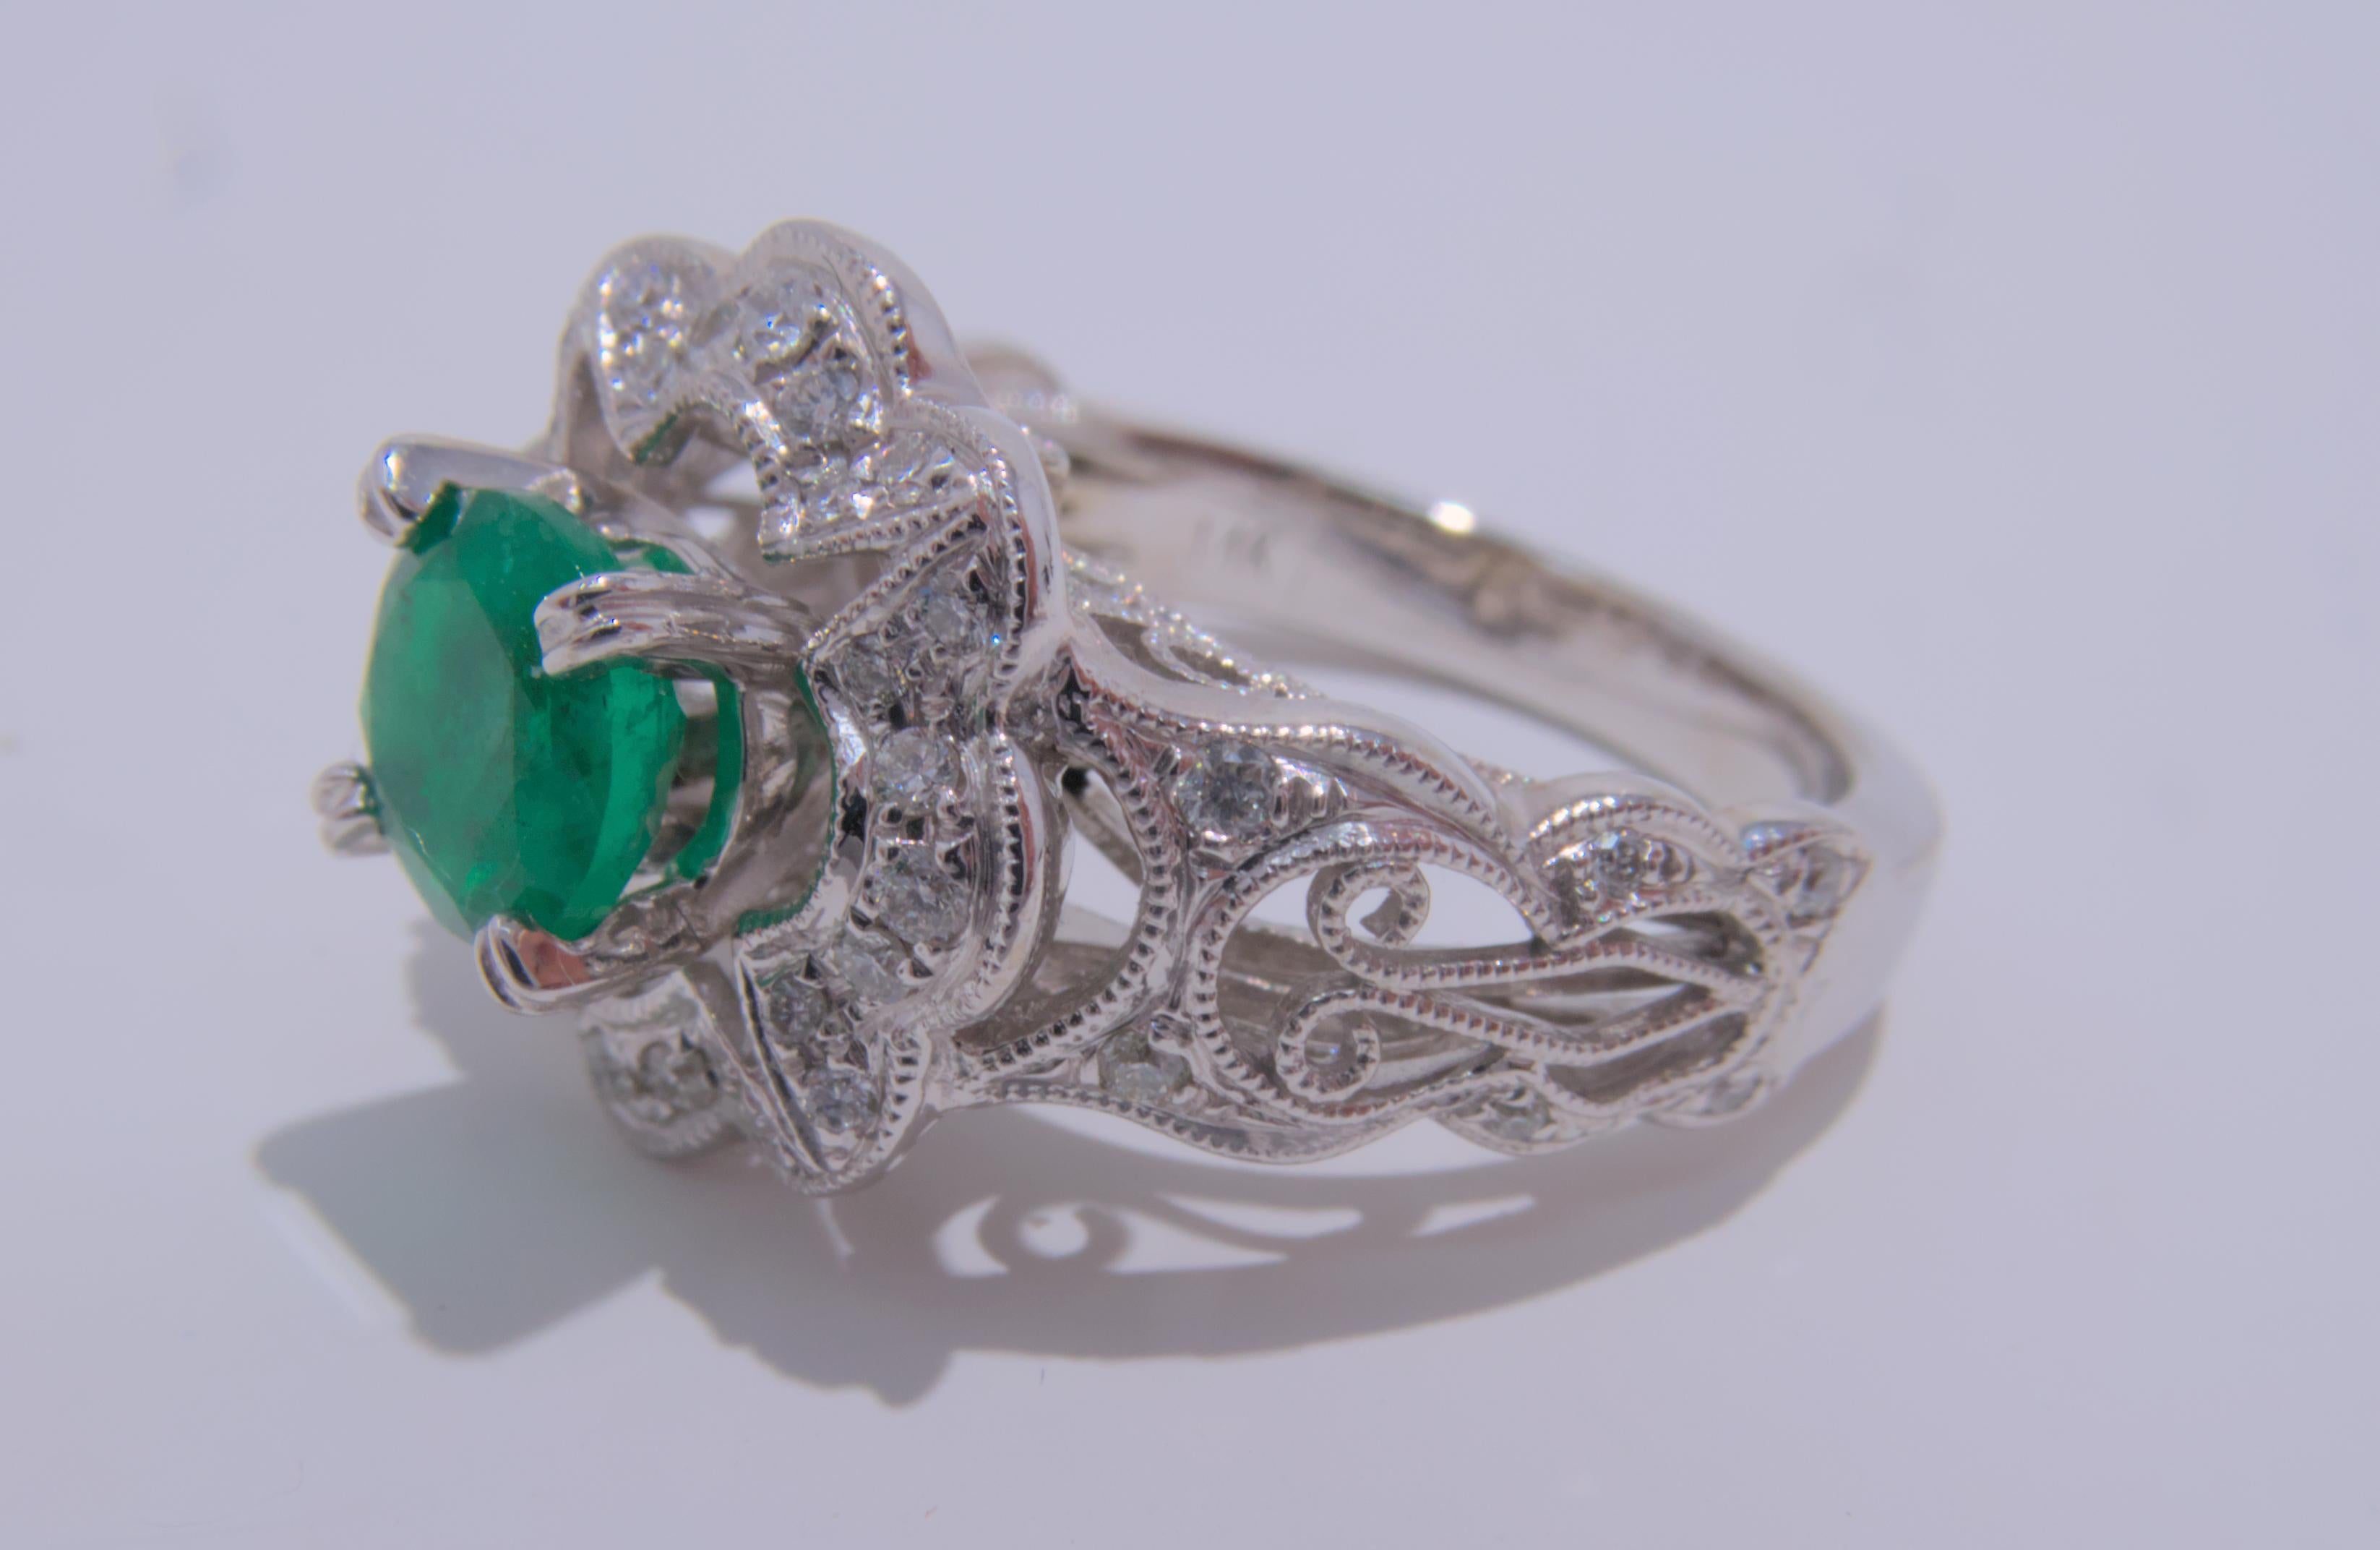 This beautiful 14K white gold ring features a stunning round emerald at its center, surrounded by sparkling diamonds. The total estimated weight of the emerald is .77 carats, adding a pop of color and a touch of luxury to the piece. The diamonds,